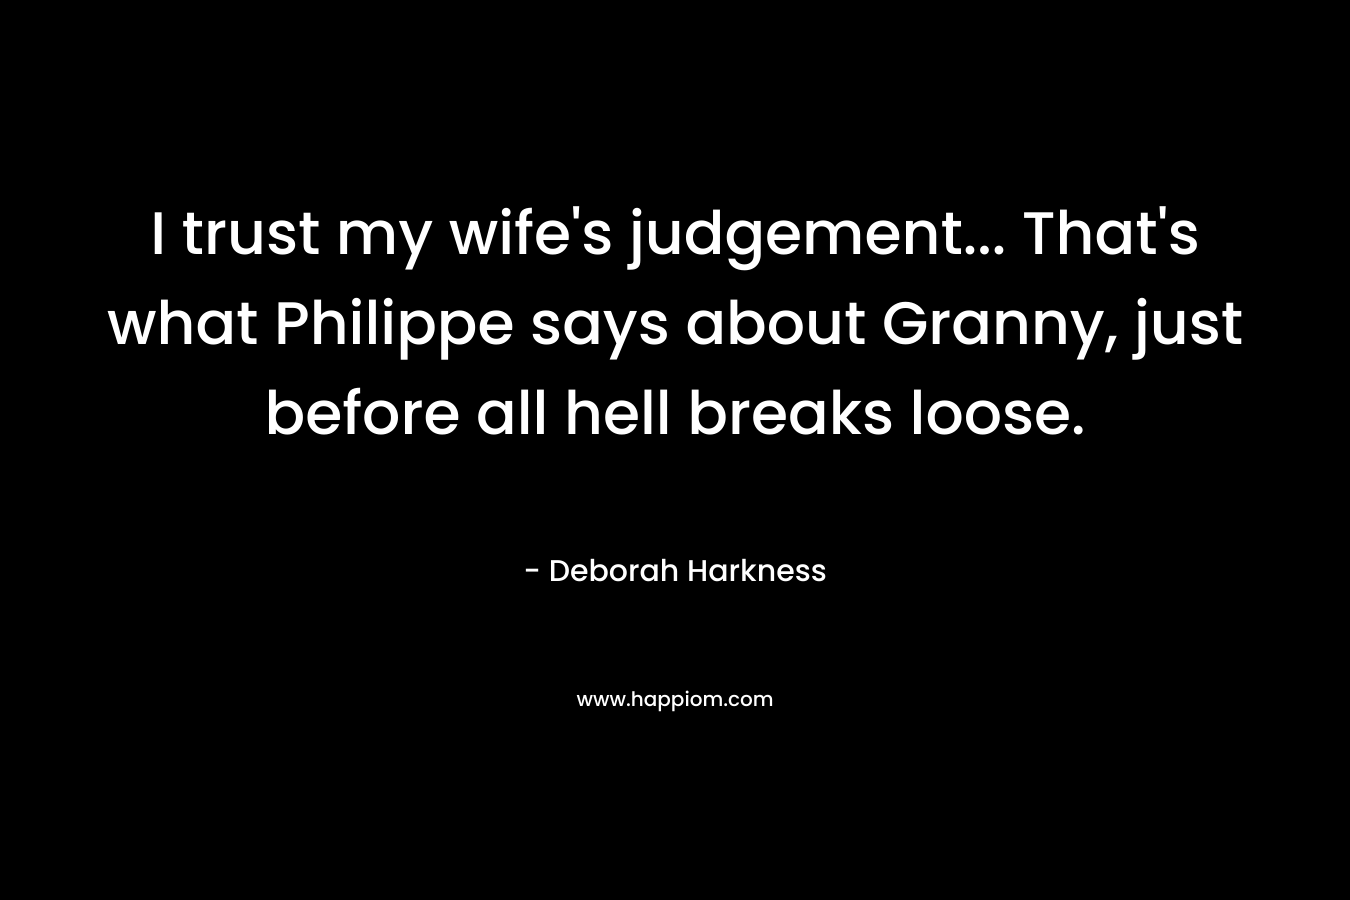 I trust my wife's judgement... That's what Philippe says about Granny, just before all hell breaks loose.